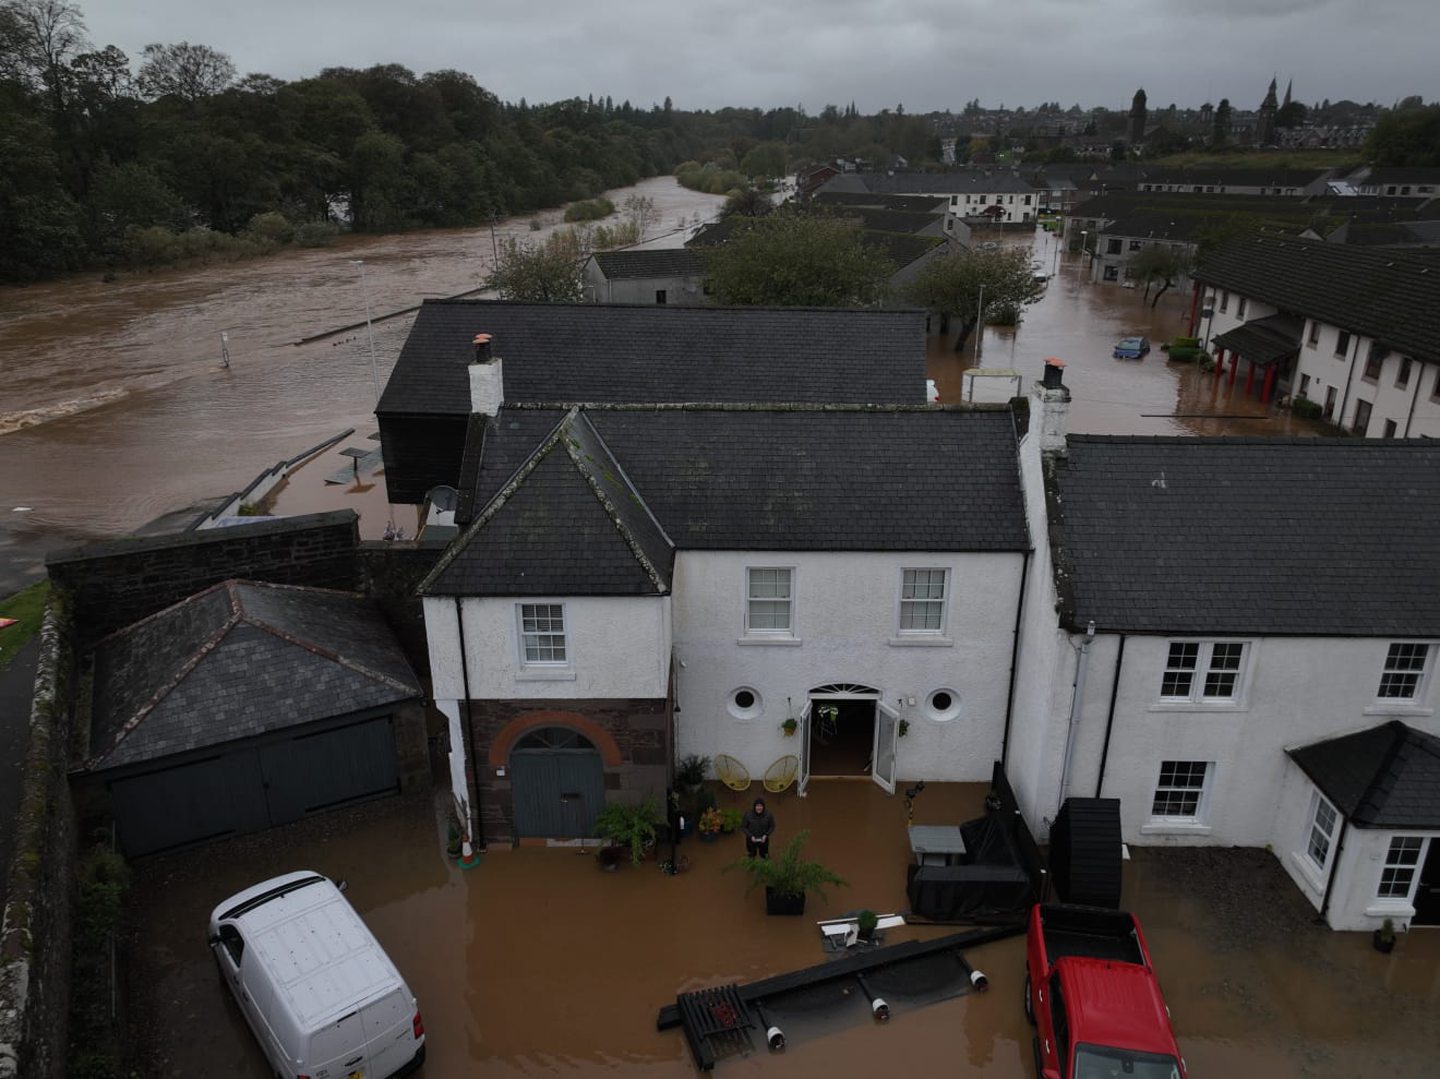 Drone shot of the flooding aftermath in Brechin as streets and homes submerged underwater.